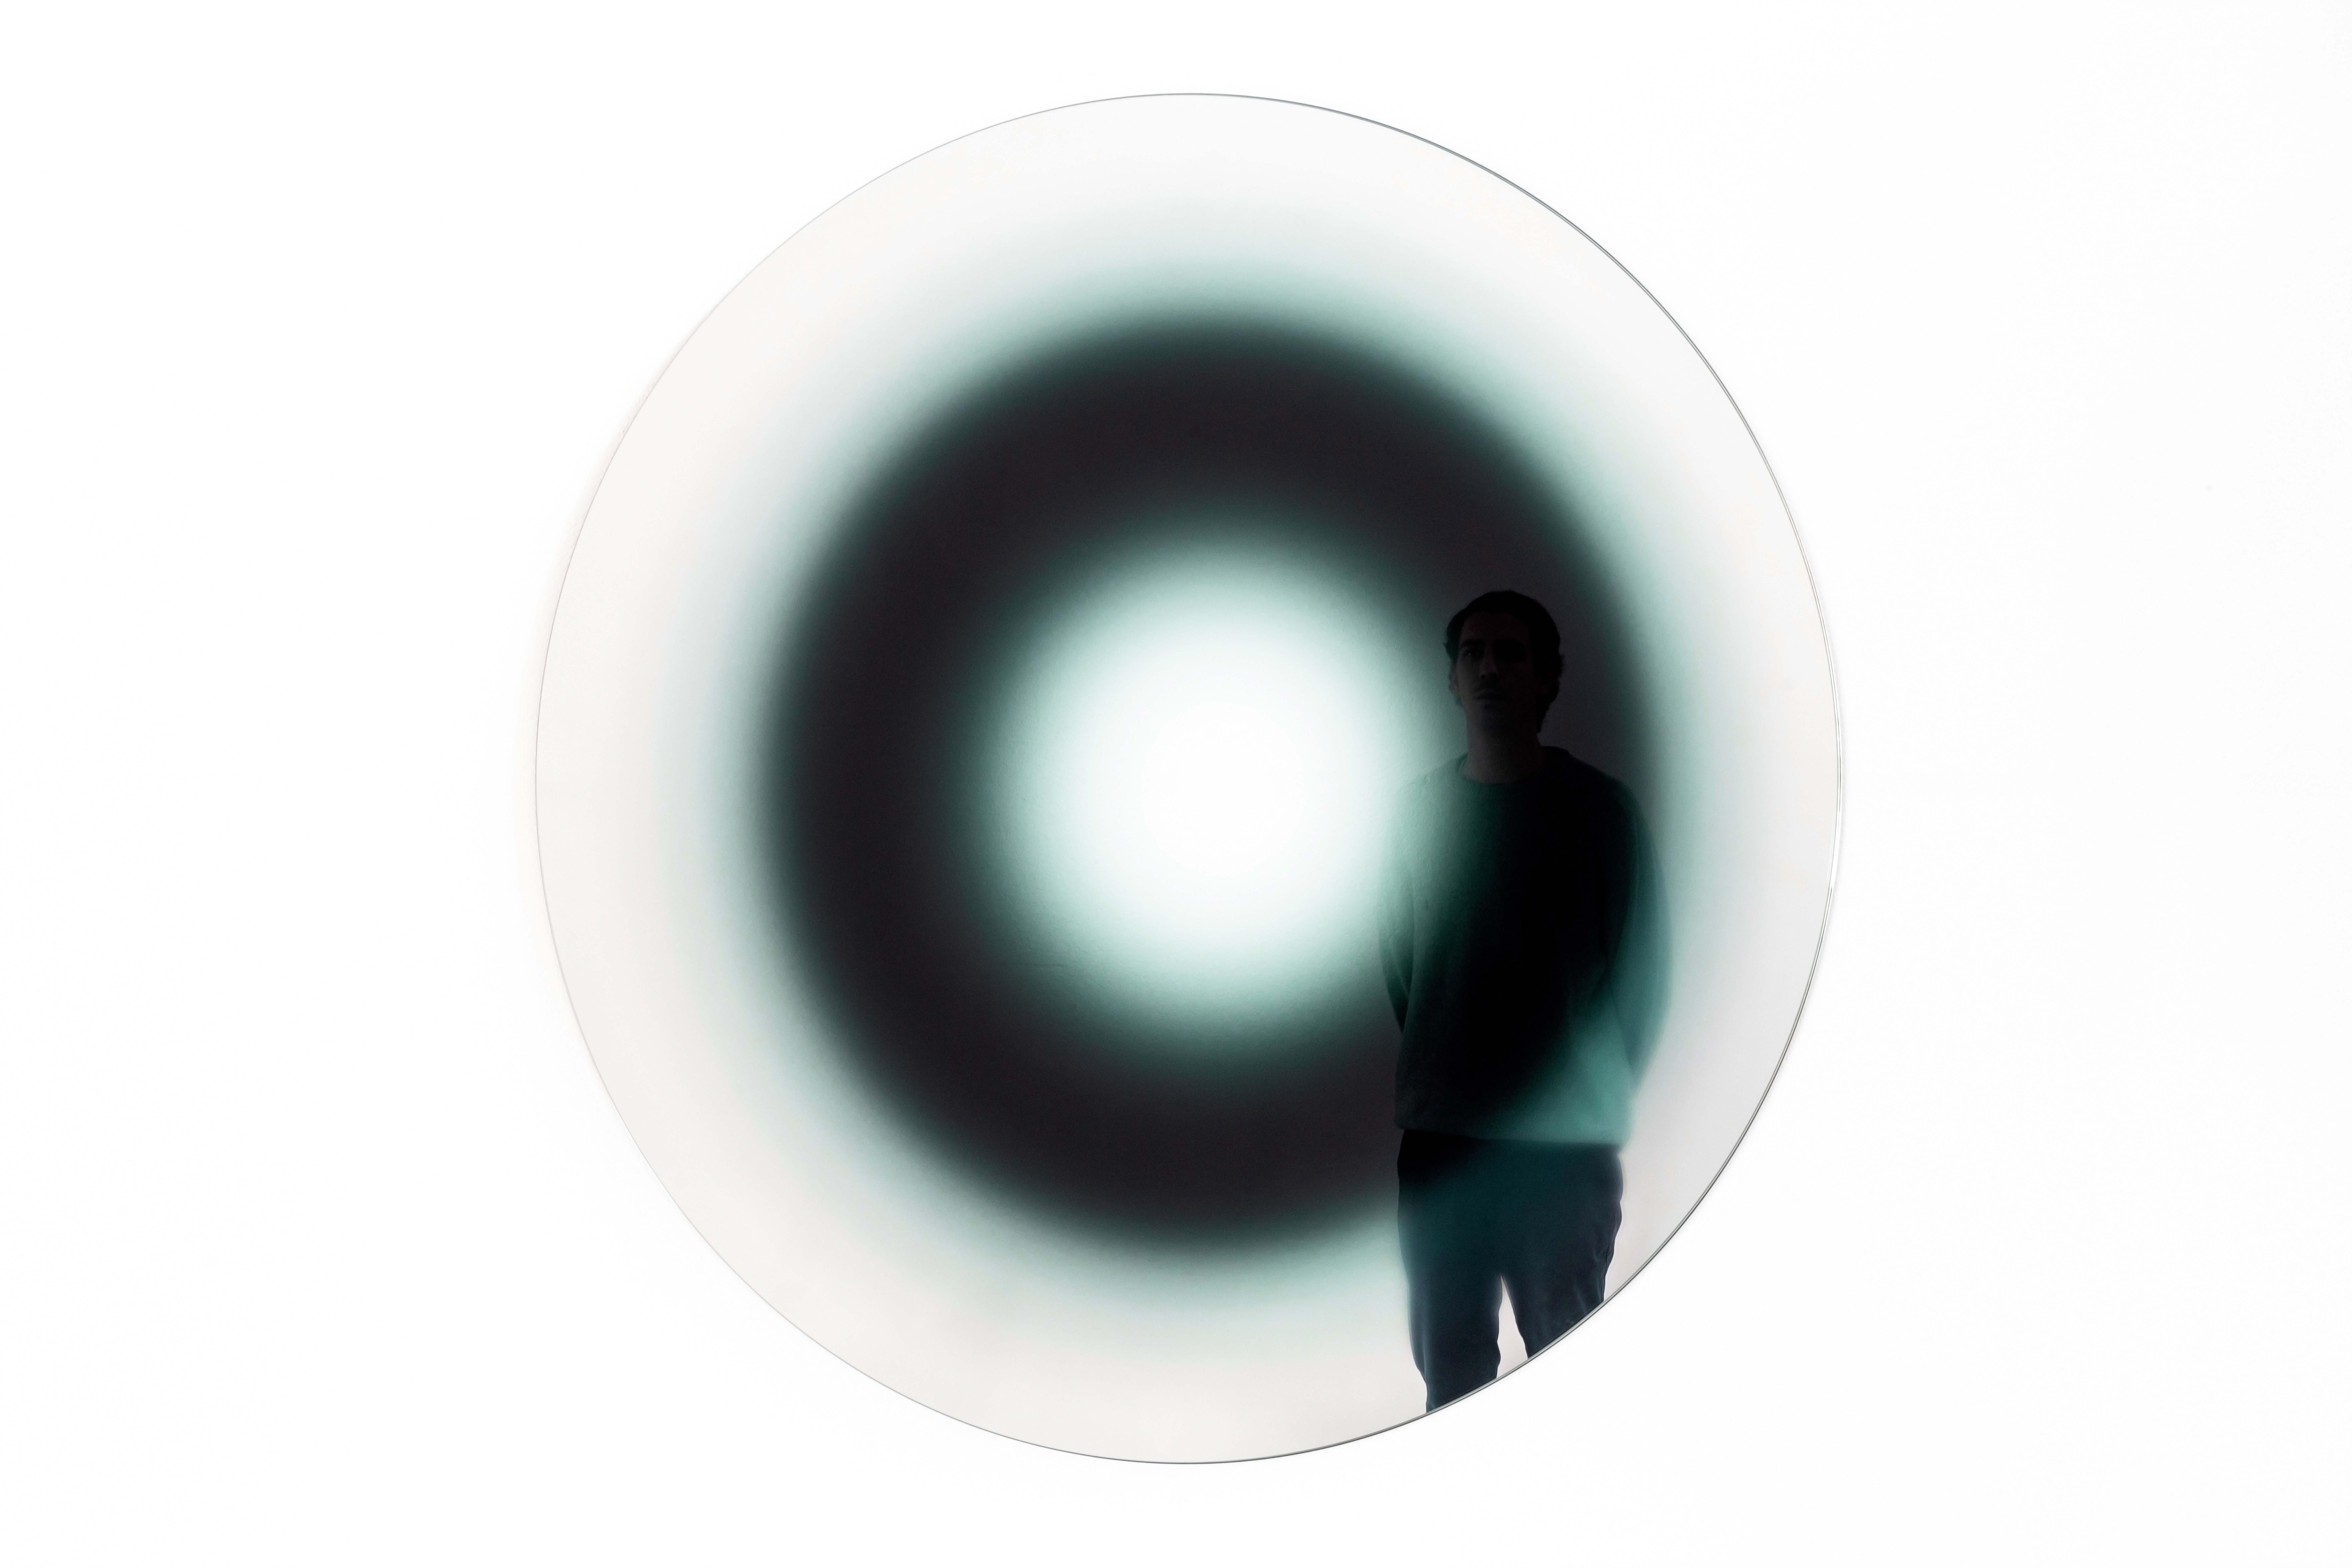 Inevitable Future wall mirror by Celo.1
Dimensions: D160x H2 cm
Materials: metal, laminated glass mirror.

Inevitable Future
The mirror is composed by three areas: an outer ring which reflects its surrounding, an inner, dark-shaded ring which